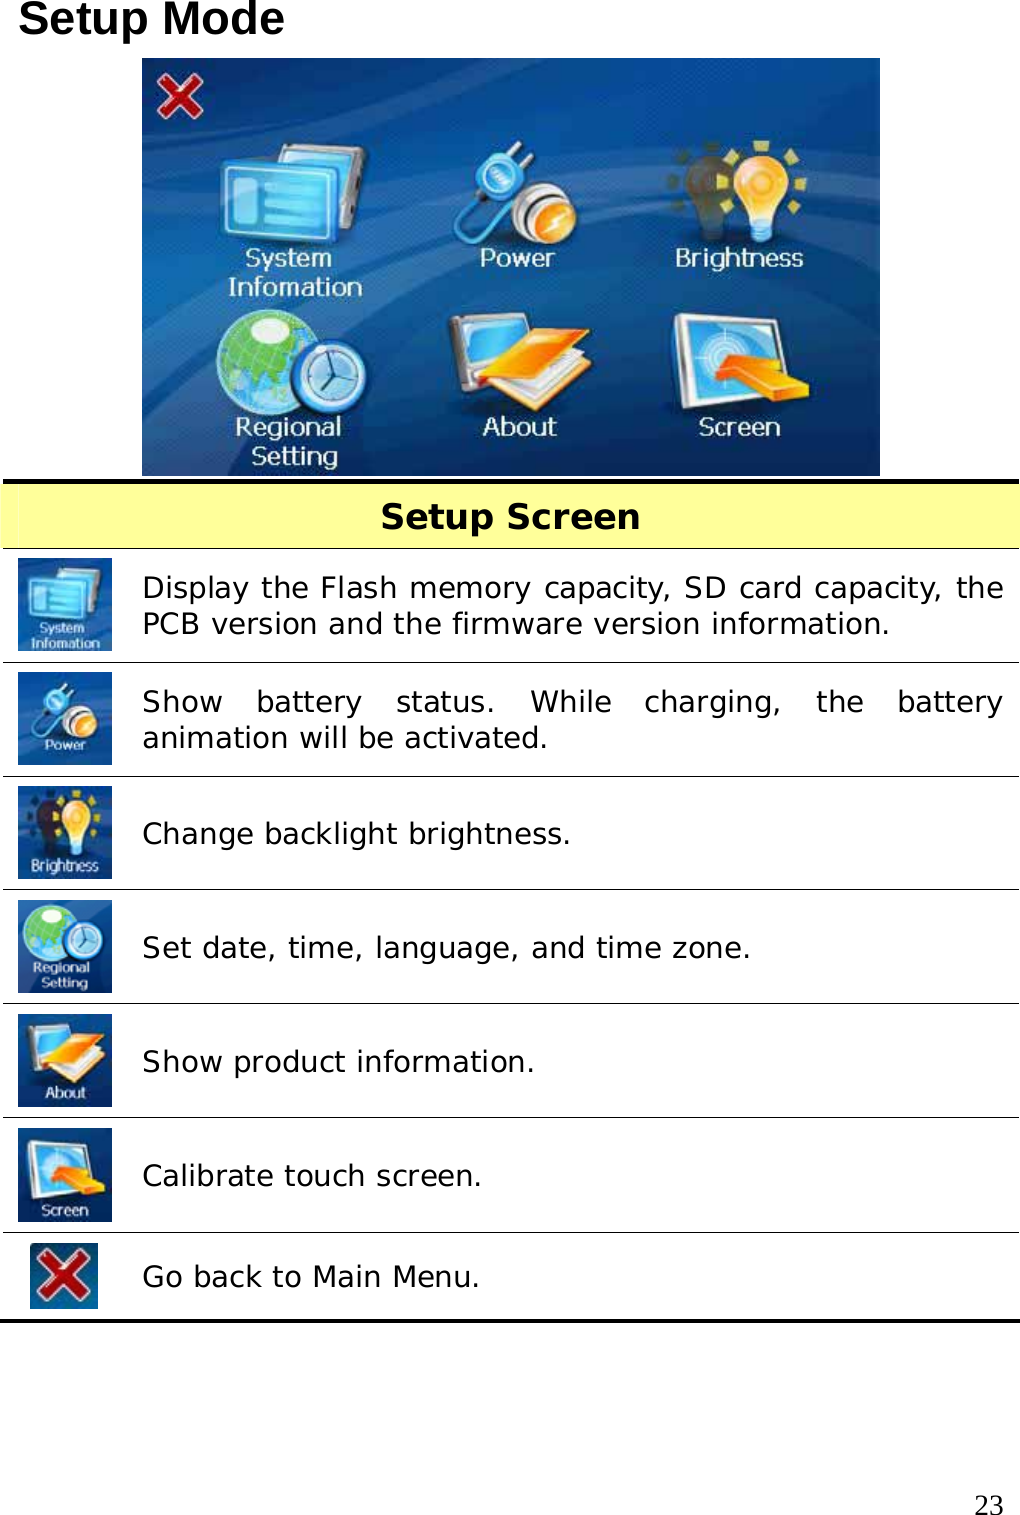  23 Setup Mode  Setup Screen  Display the Flash memory capacity, SD card capacity, the PCB version and the firmware version information.   Show battery status. While charging, the battery animation will be activated.    Change backlight brightness.  Set date, time, language, and time zone.    Show product information.  Calibrate touch screen.  Go back to Main Menu. 